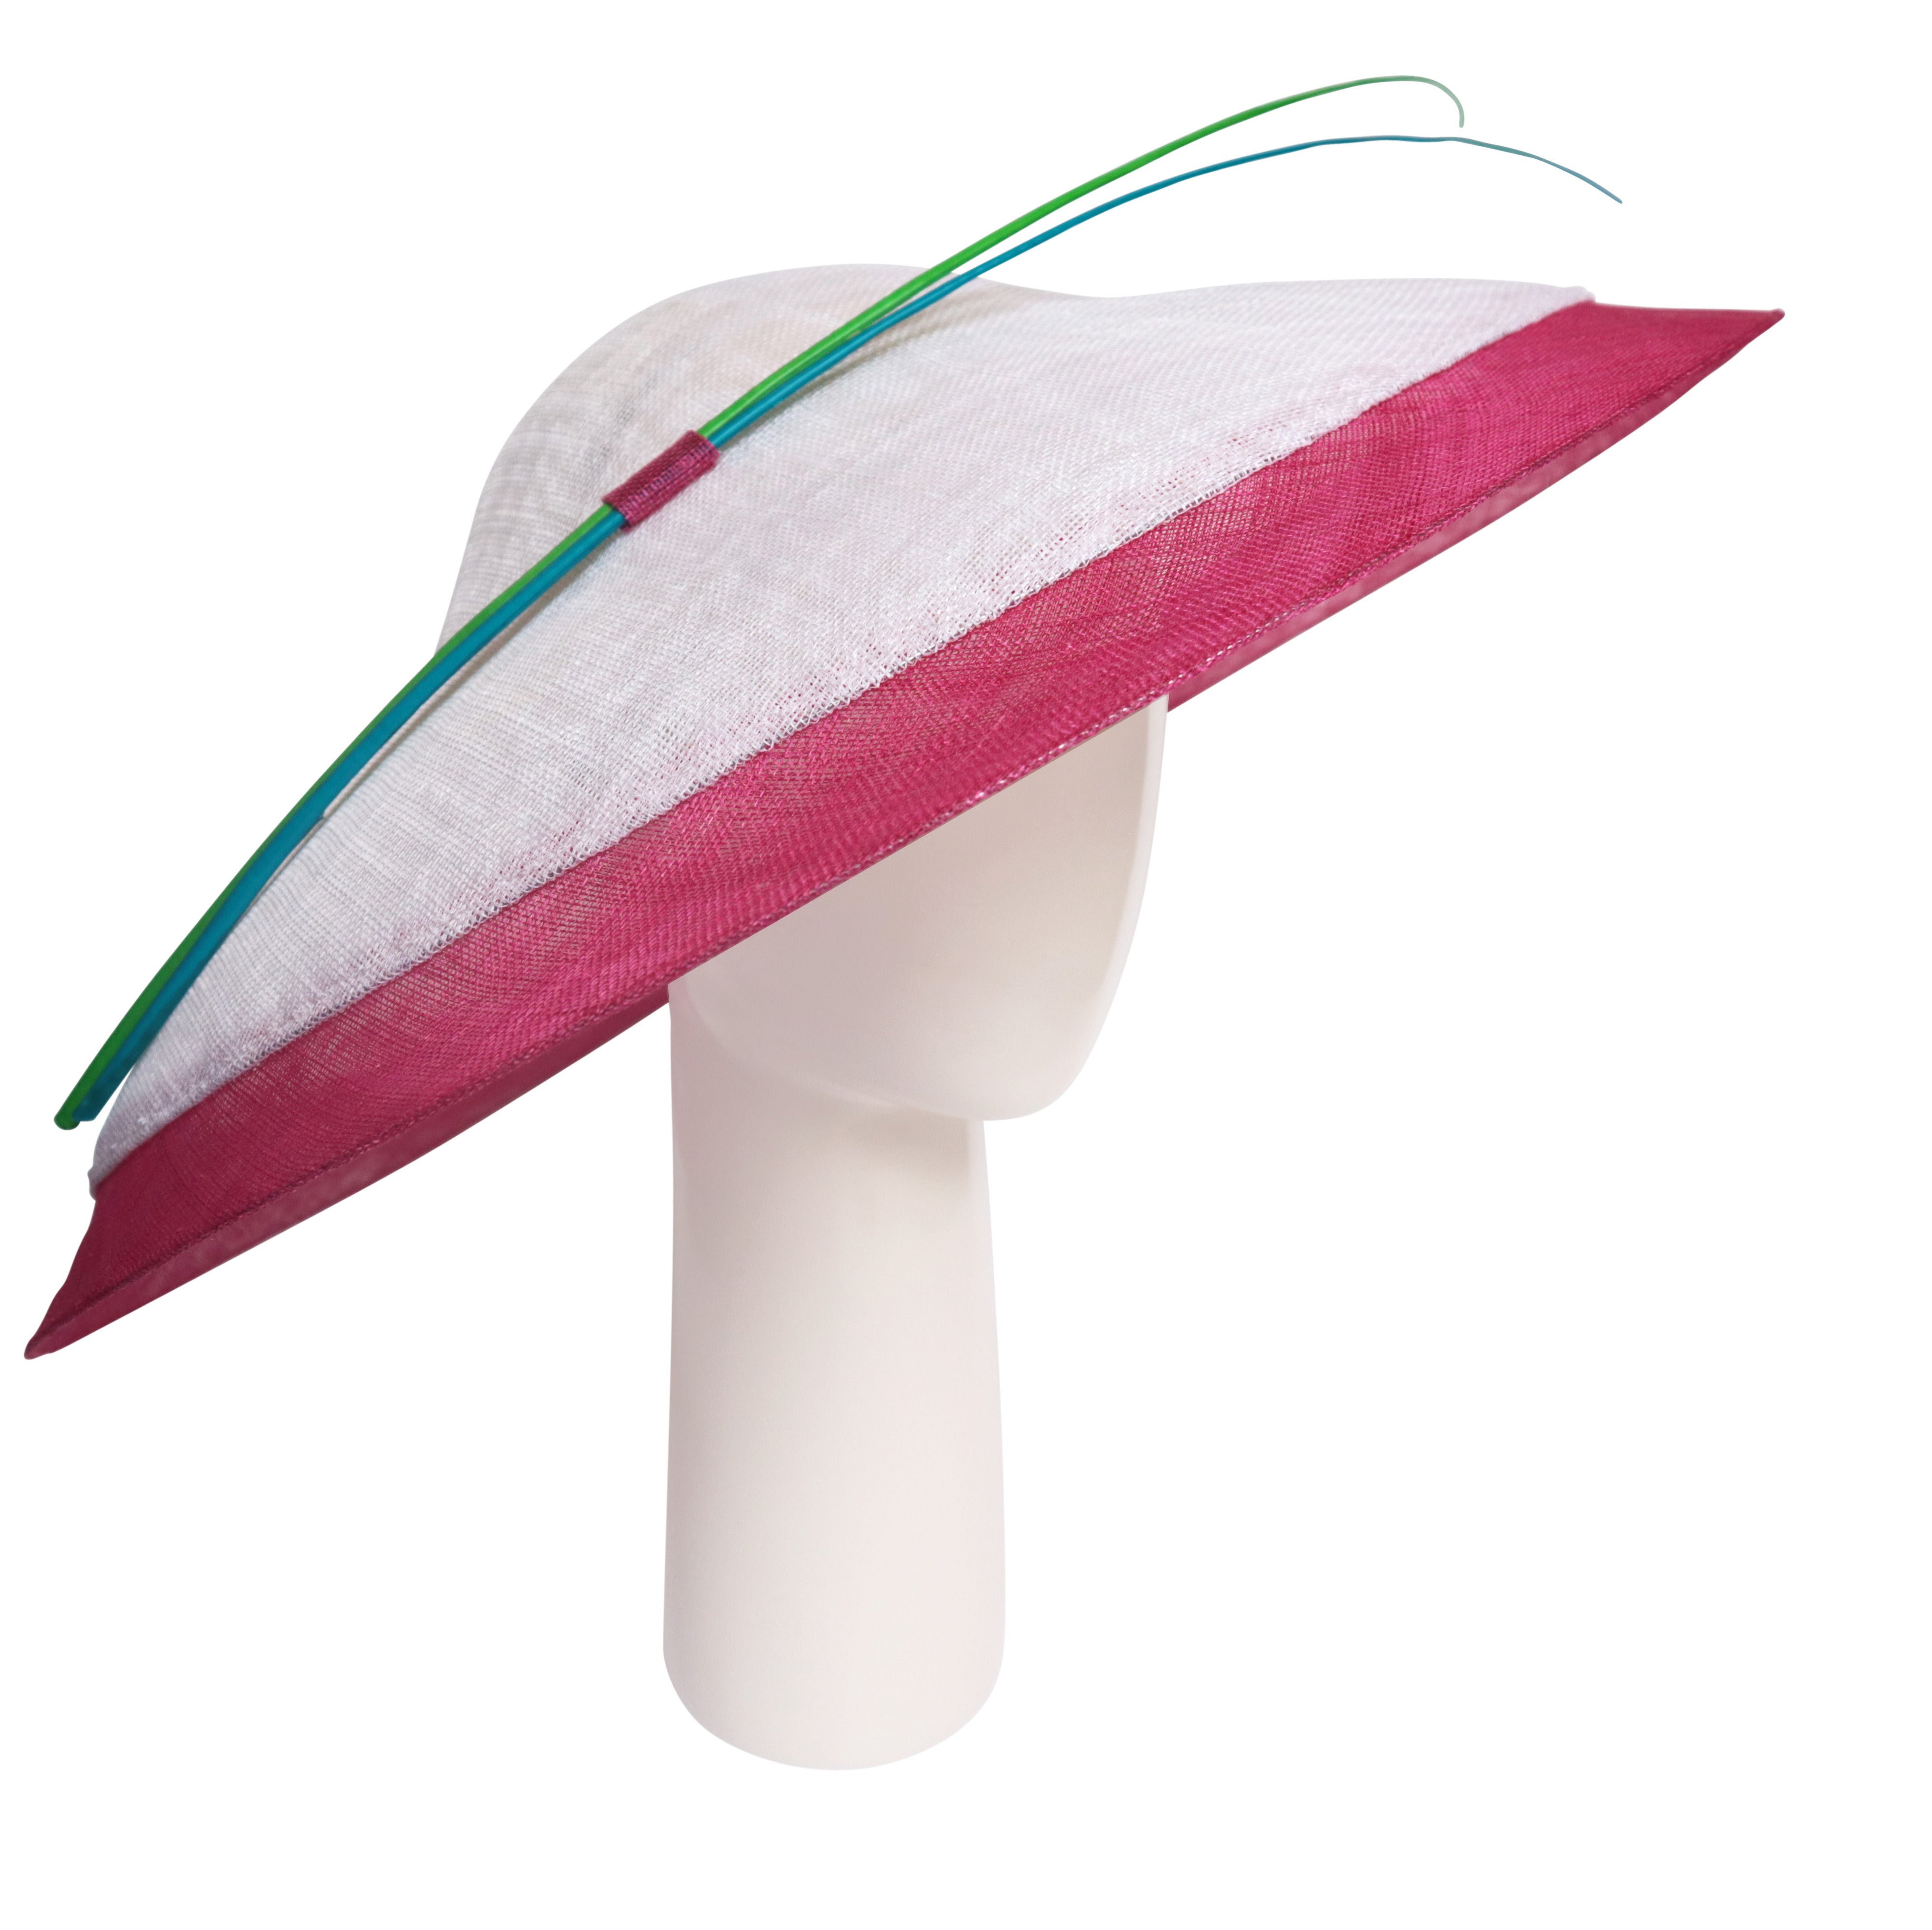 Large Two Tone Hat in White / Fuchsia and Turquoise-Green Quills